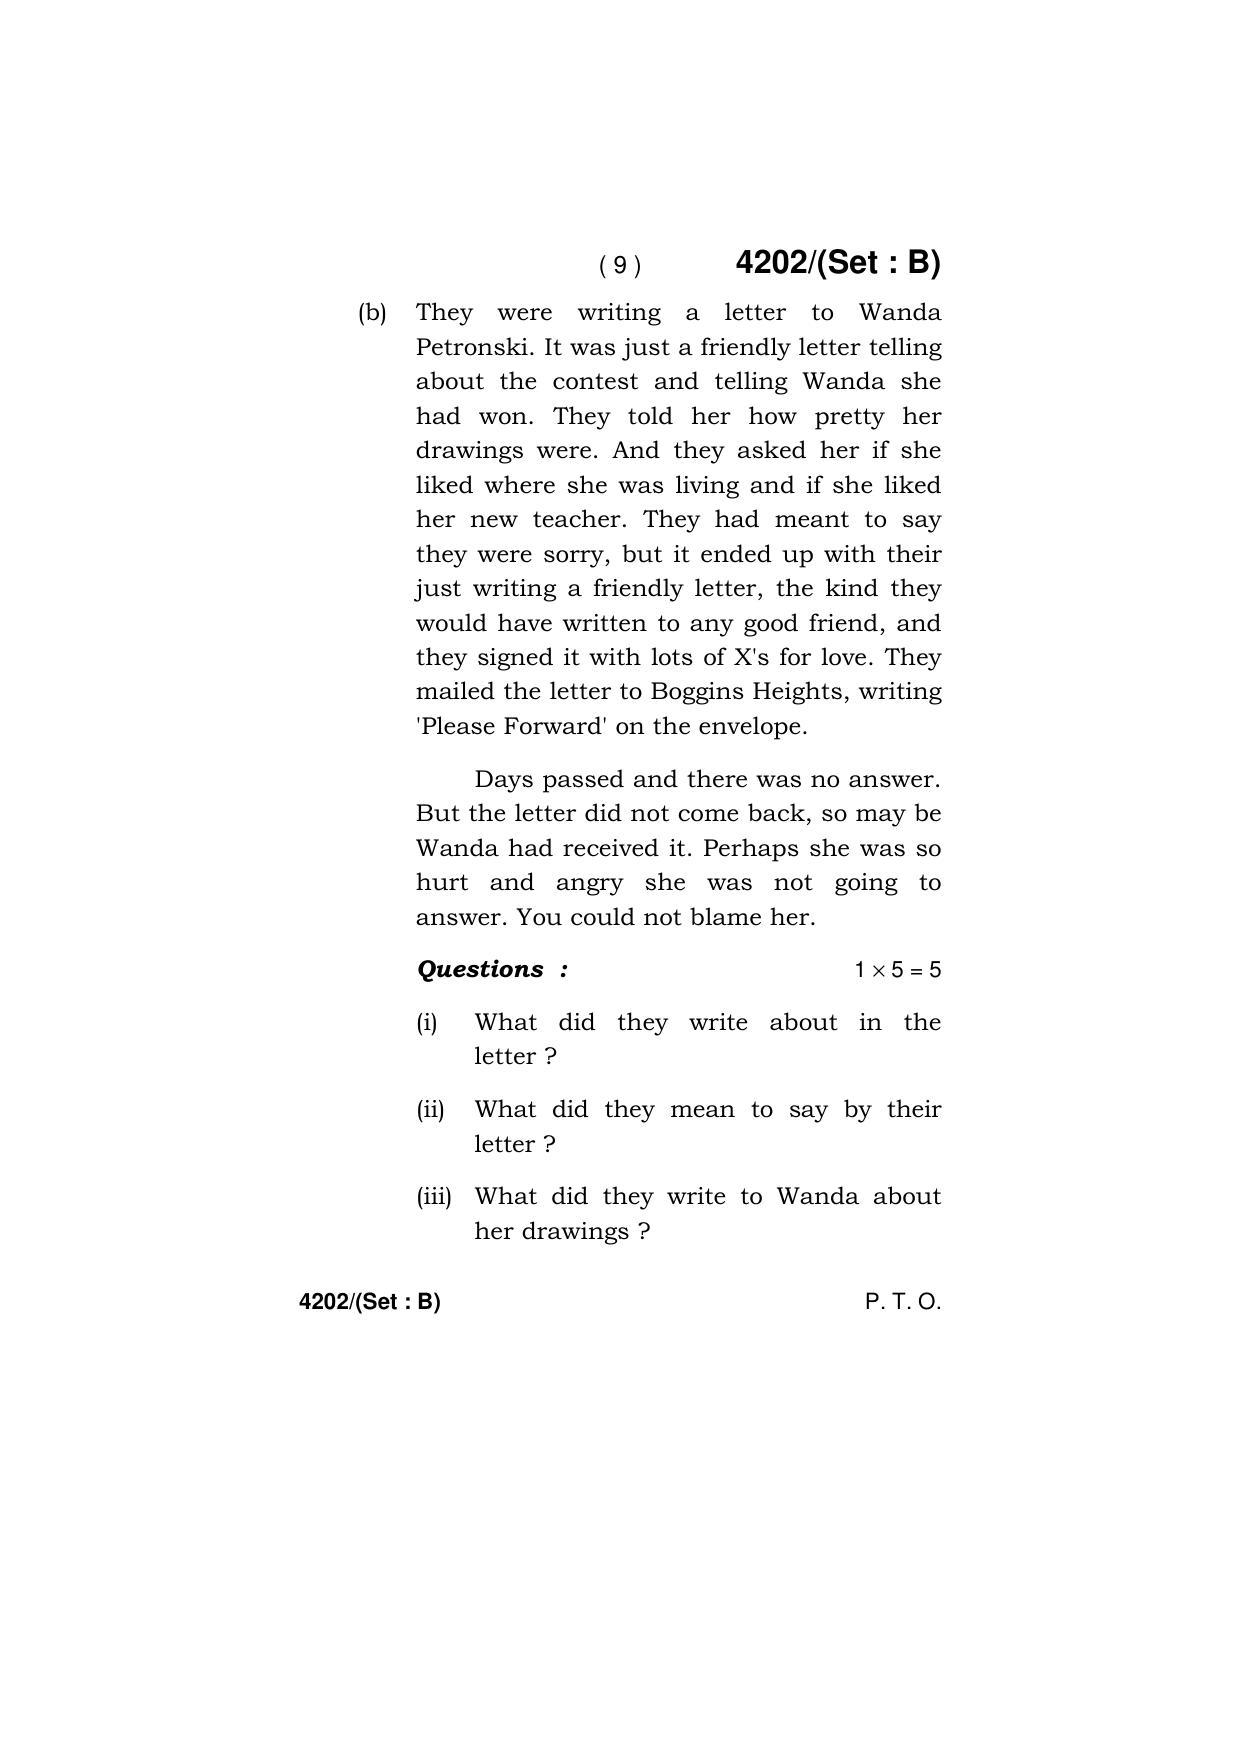 Haryana Board HBSE Class 10 English (All Set) 2019 Question Paper - Page 25